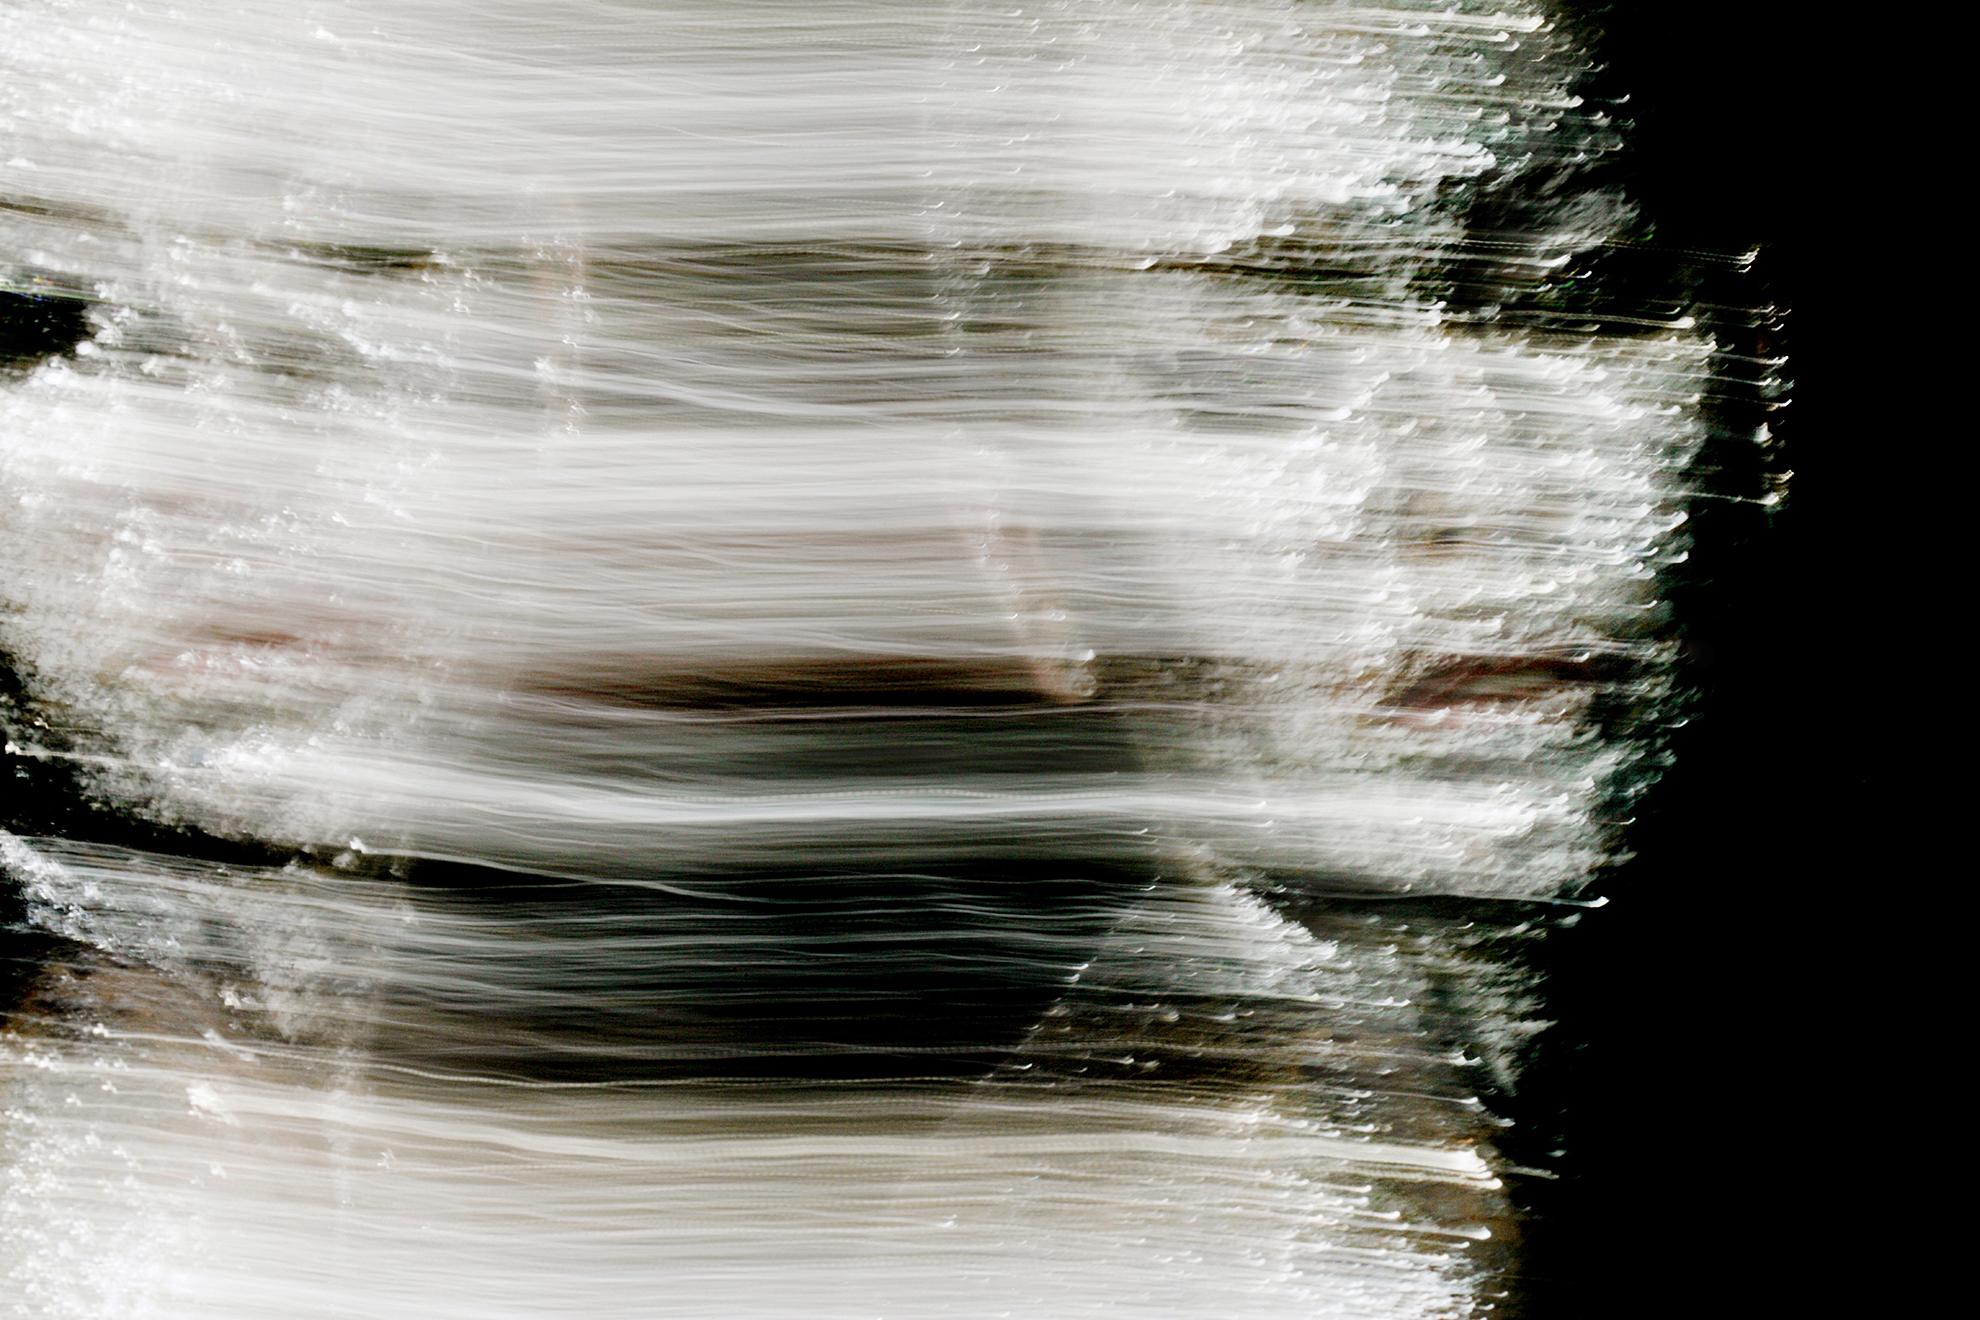 Abstract Photograph Roger Reist - La photographie d'art expressionniste abstraite « There Is No Past »